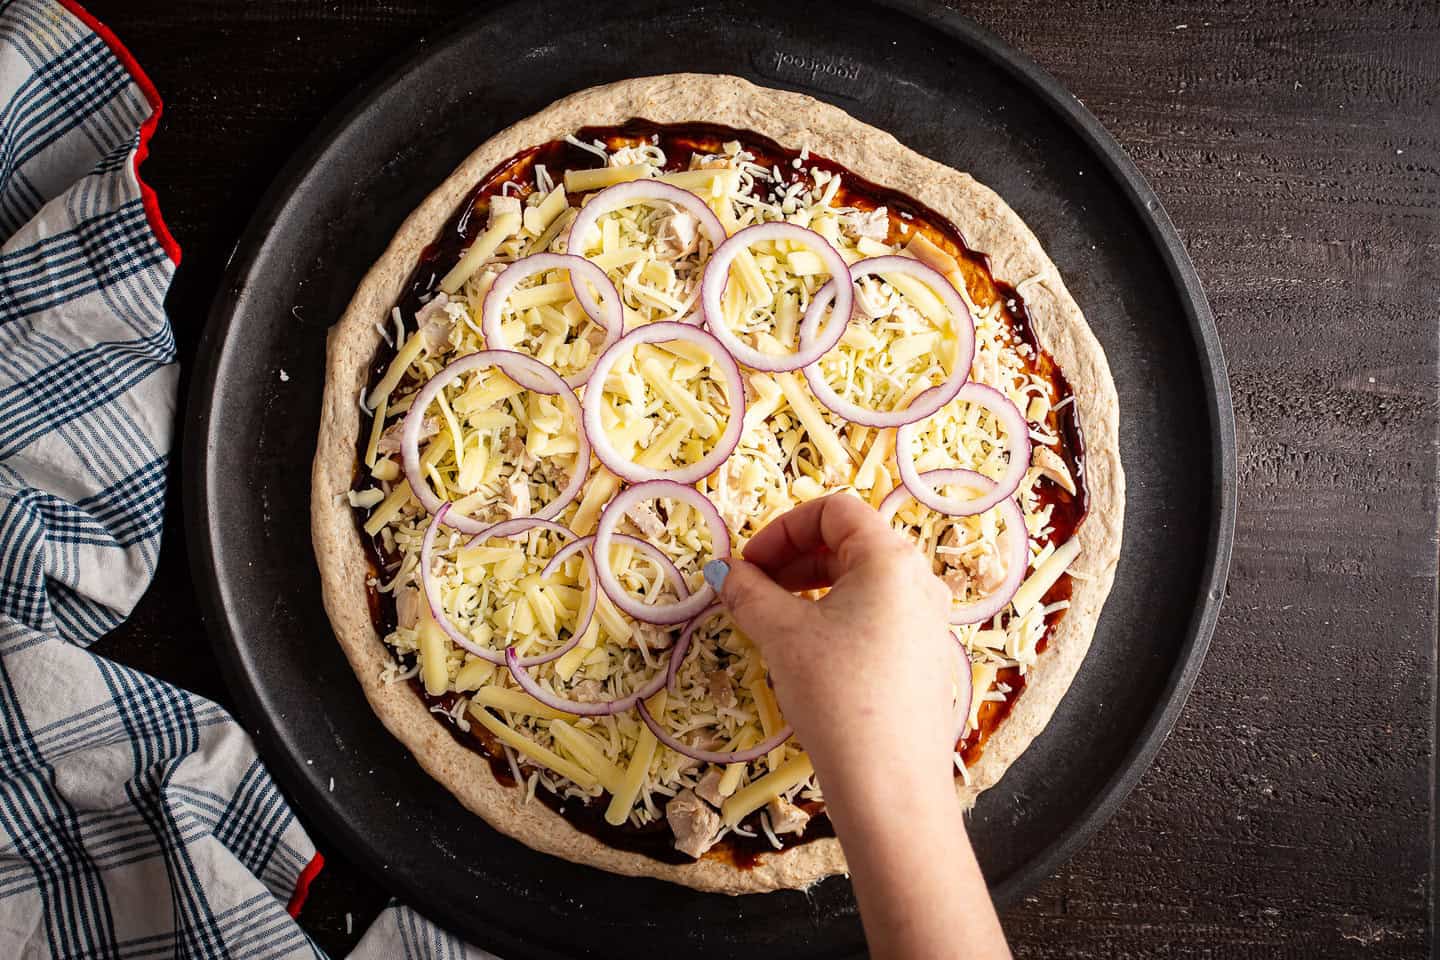 Topping homemade pizza with cooked chicken, cheese, and thin slices of red onion.